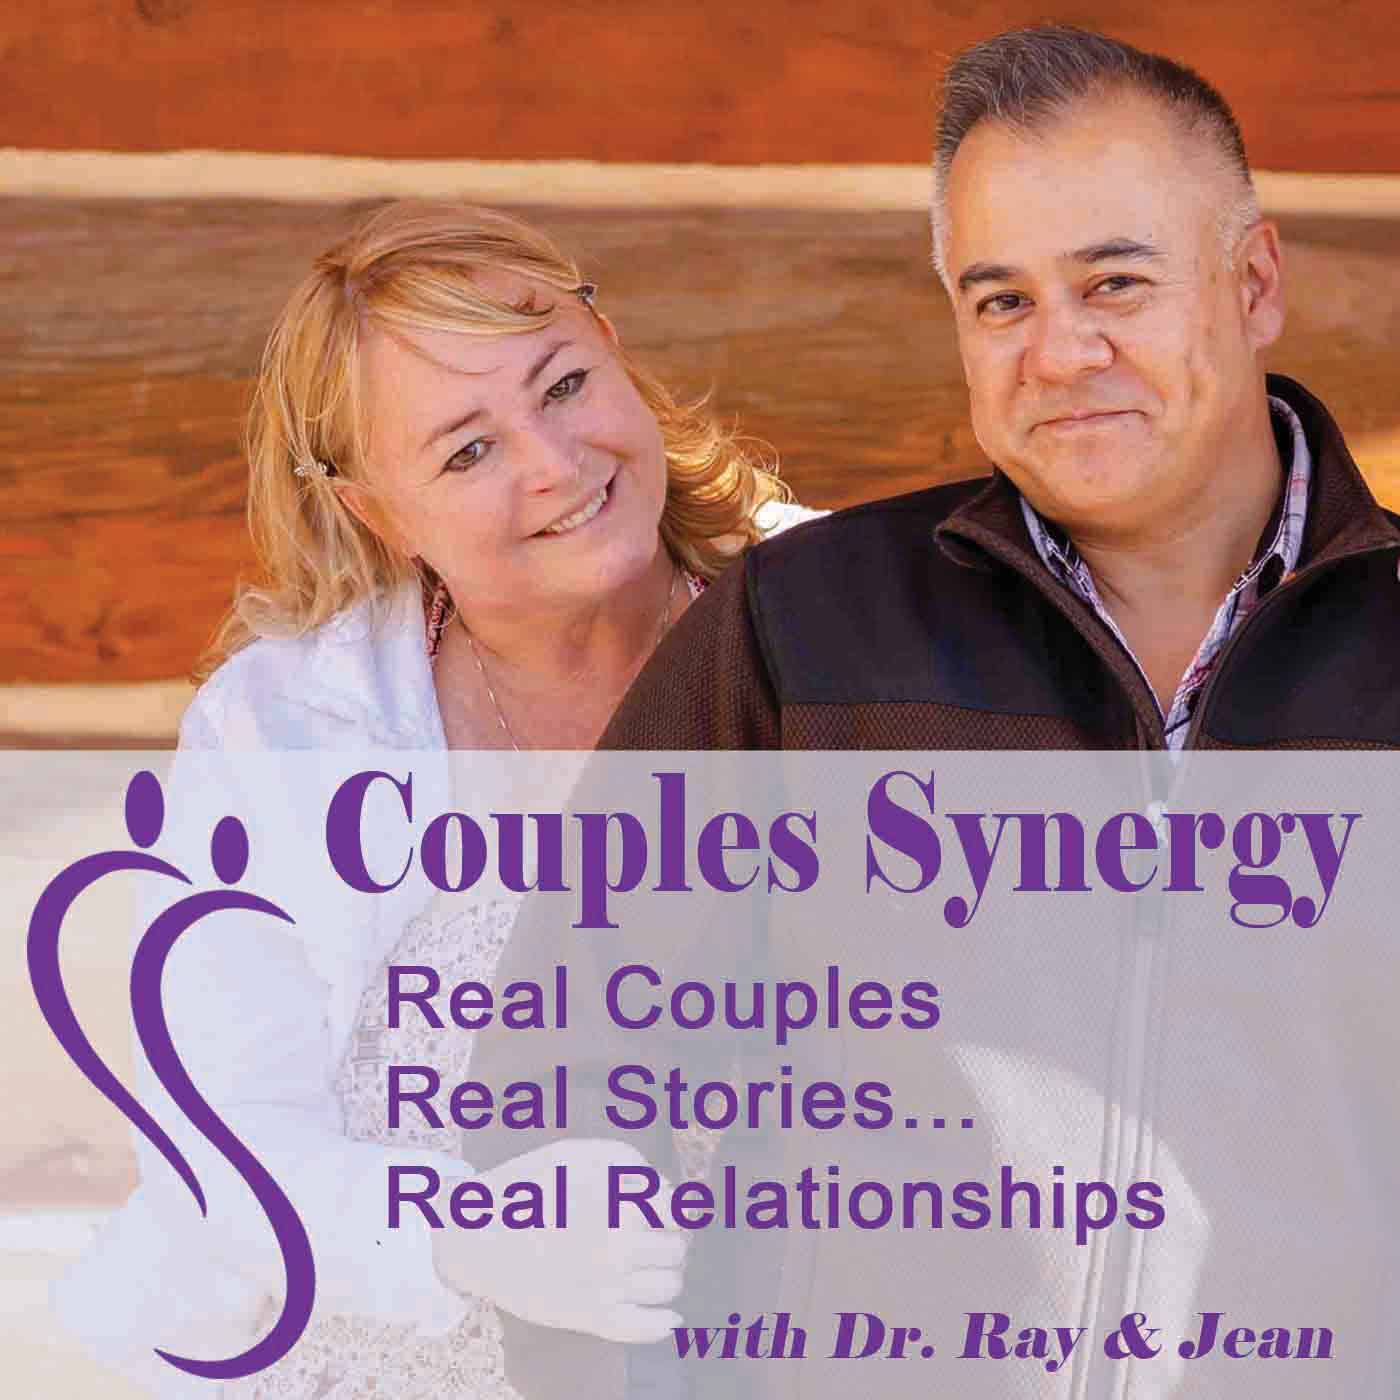 Dr Ray and Jean relationship marriage advice for couples